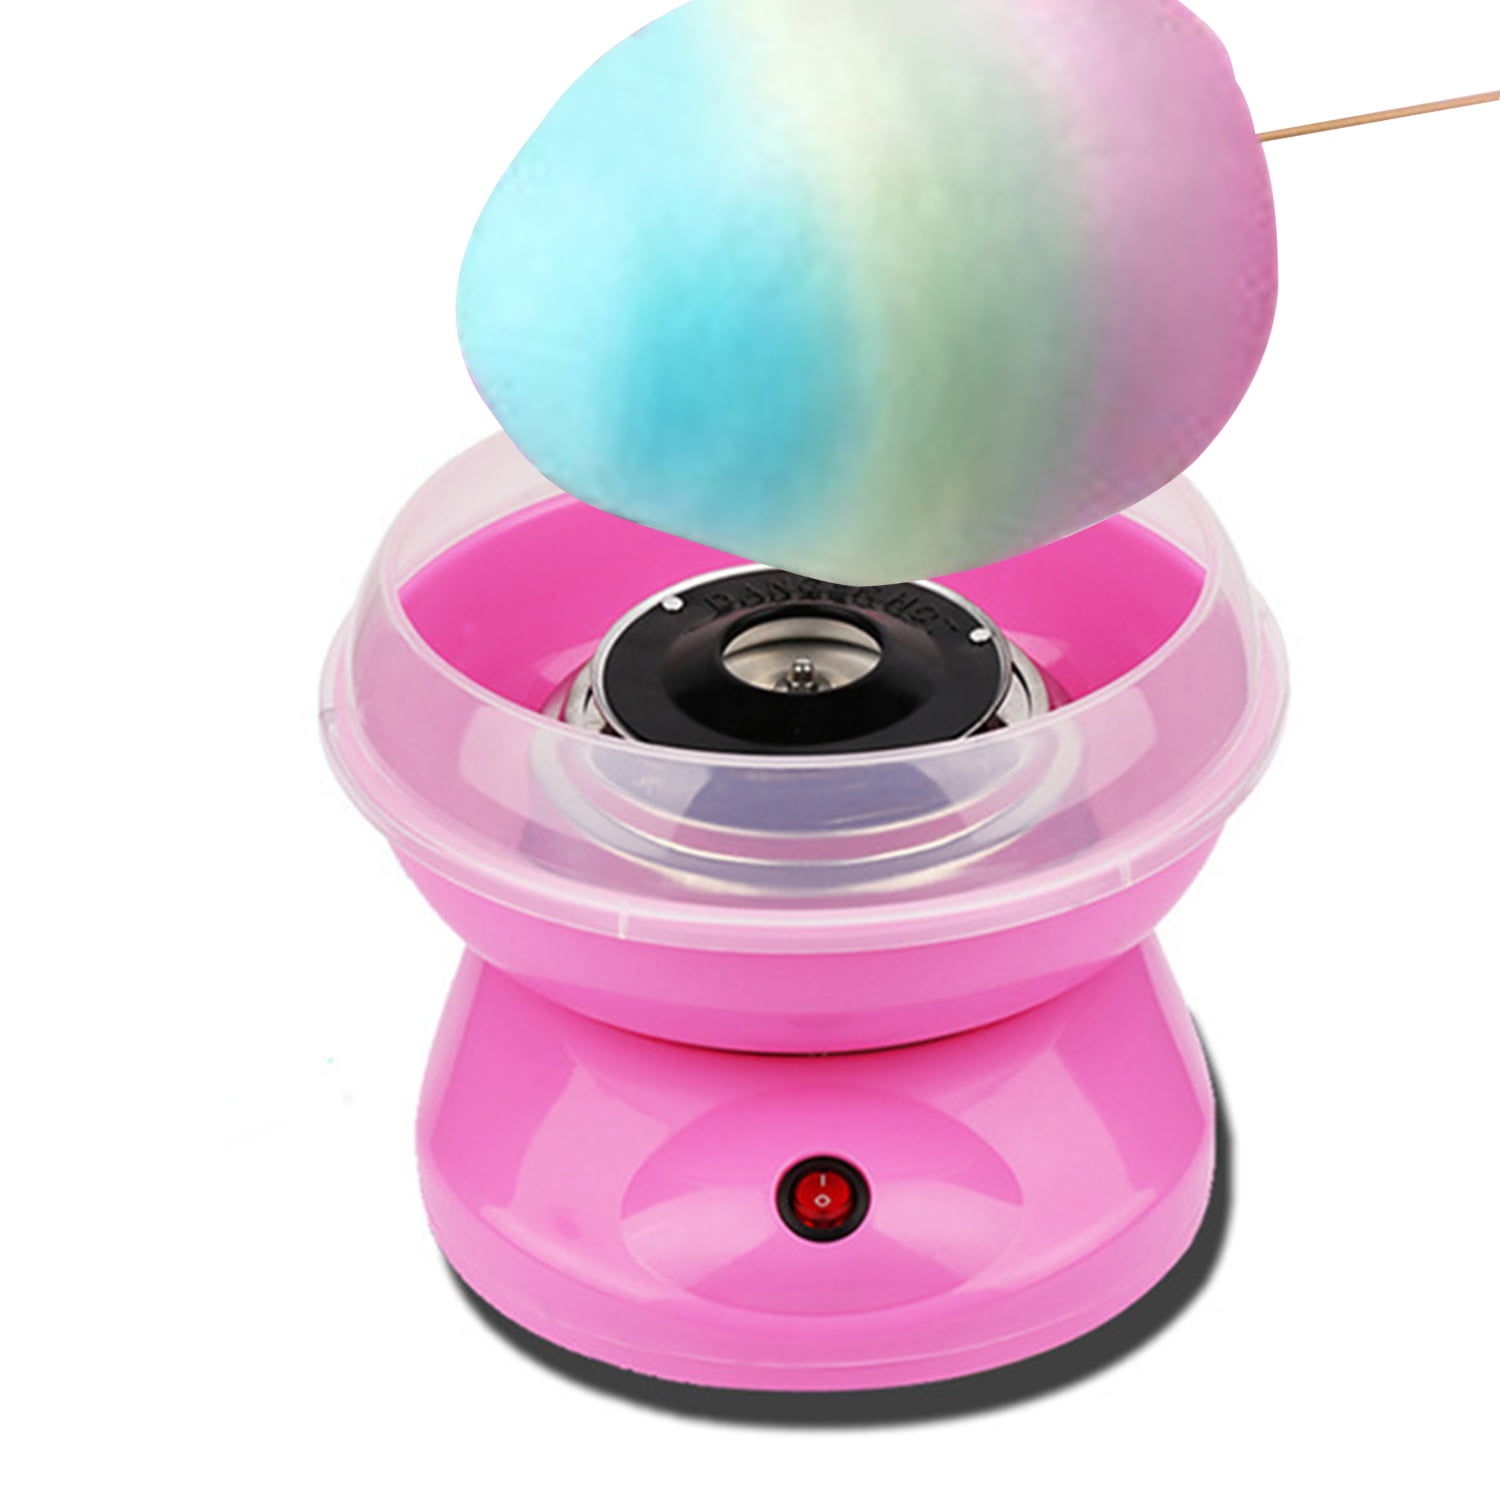 Electric Candy Floss Machine,Mini Cotton Candy Machine,Cotton Candy Machine DIY Children's Party Sugar Candy Floss Maker for Birthdays and Parties with 10Bamboo Sticks